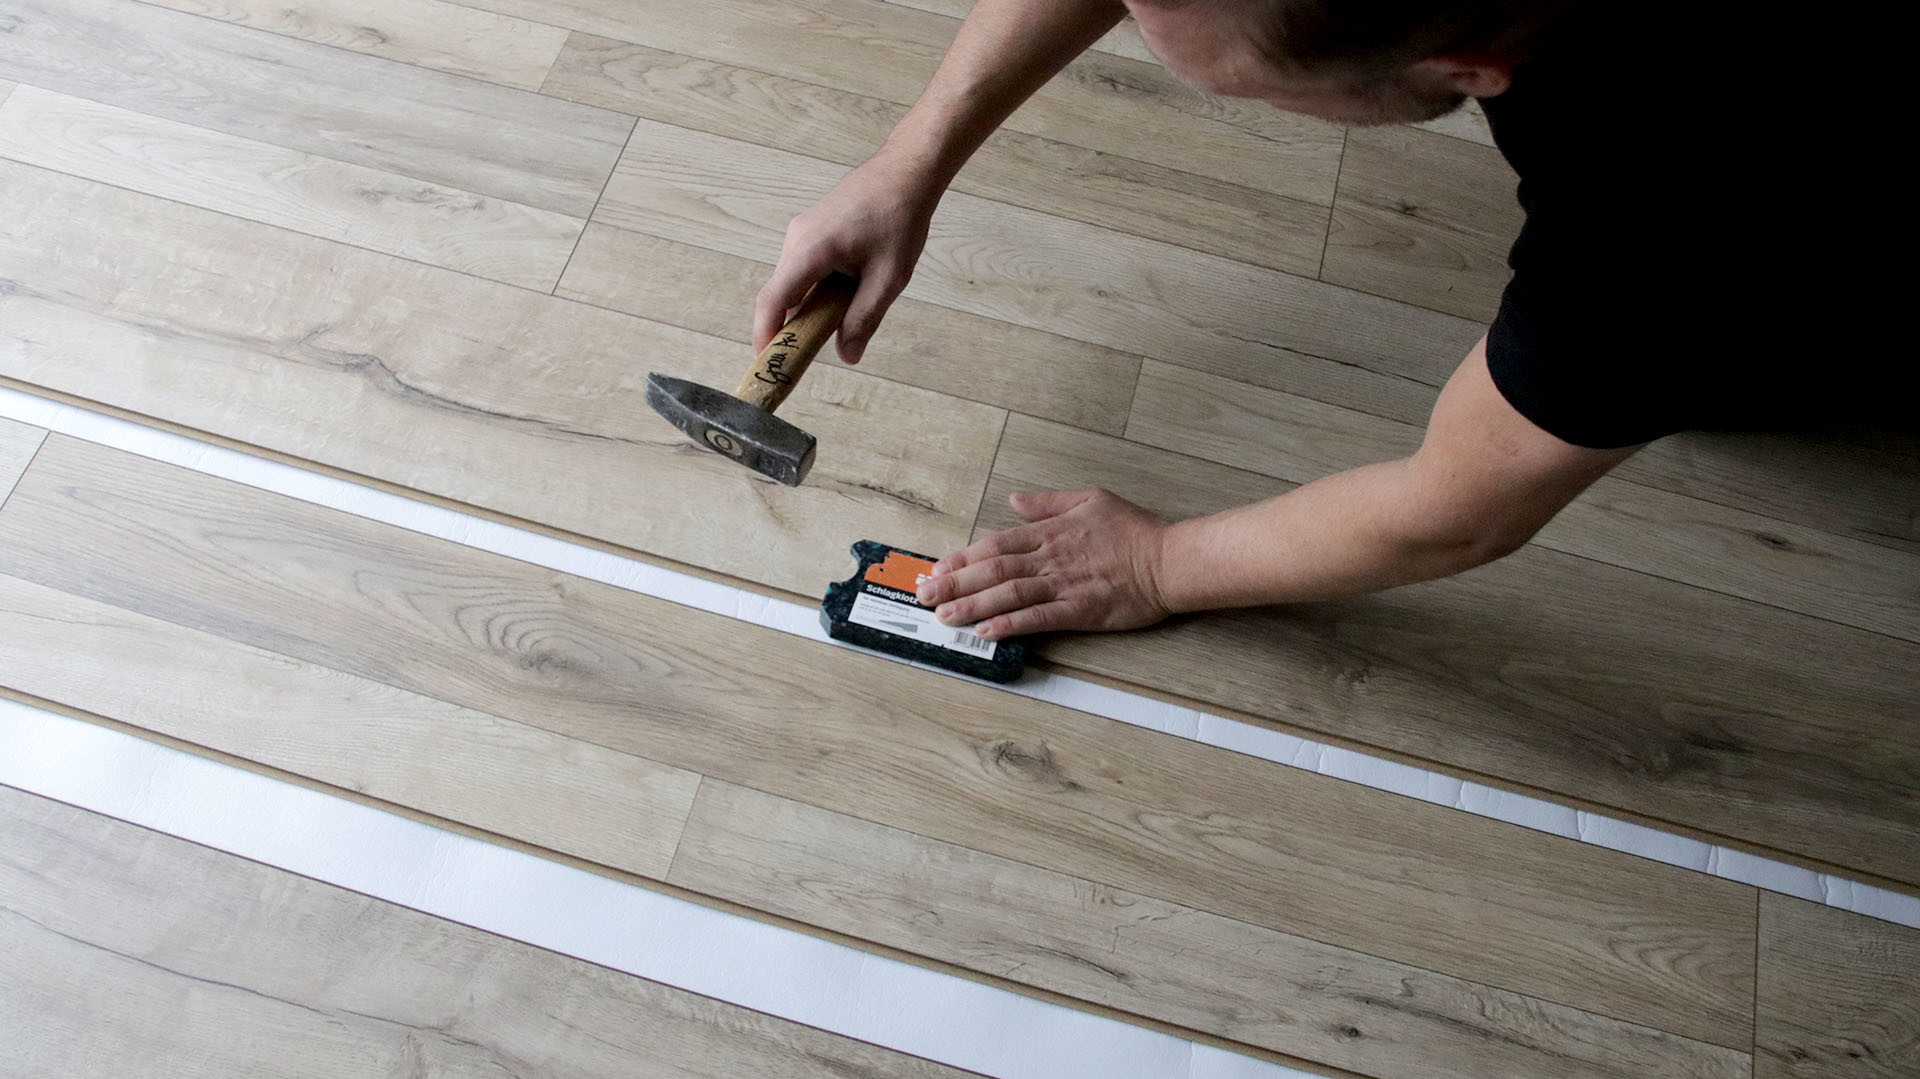 Installing Meister Laminate It S This, What Is The Easiest Laminate Flooring To Install